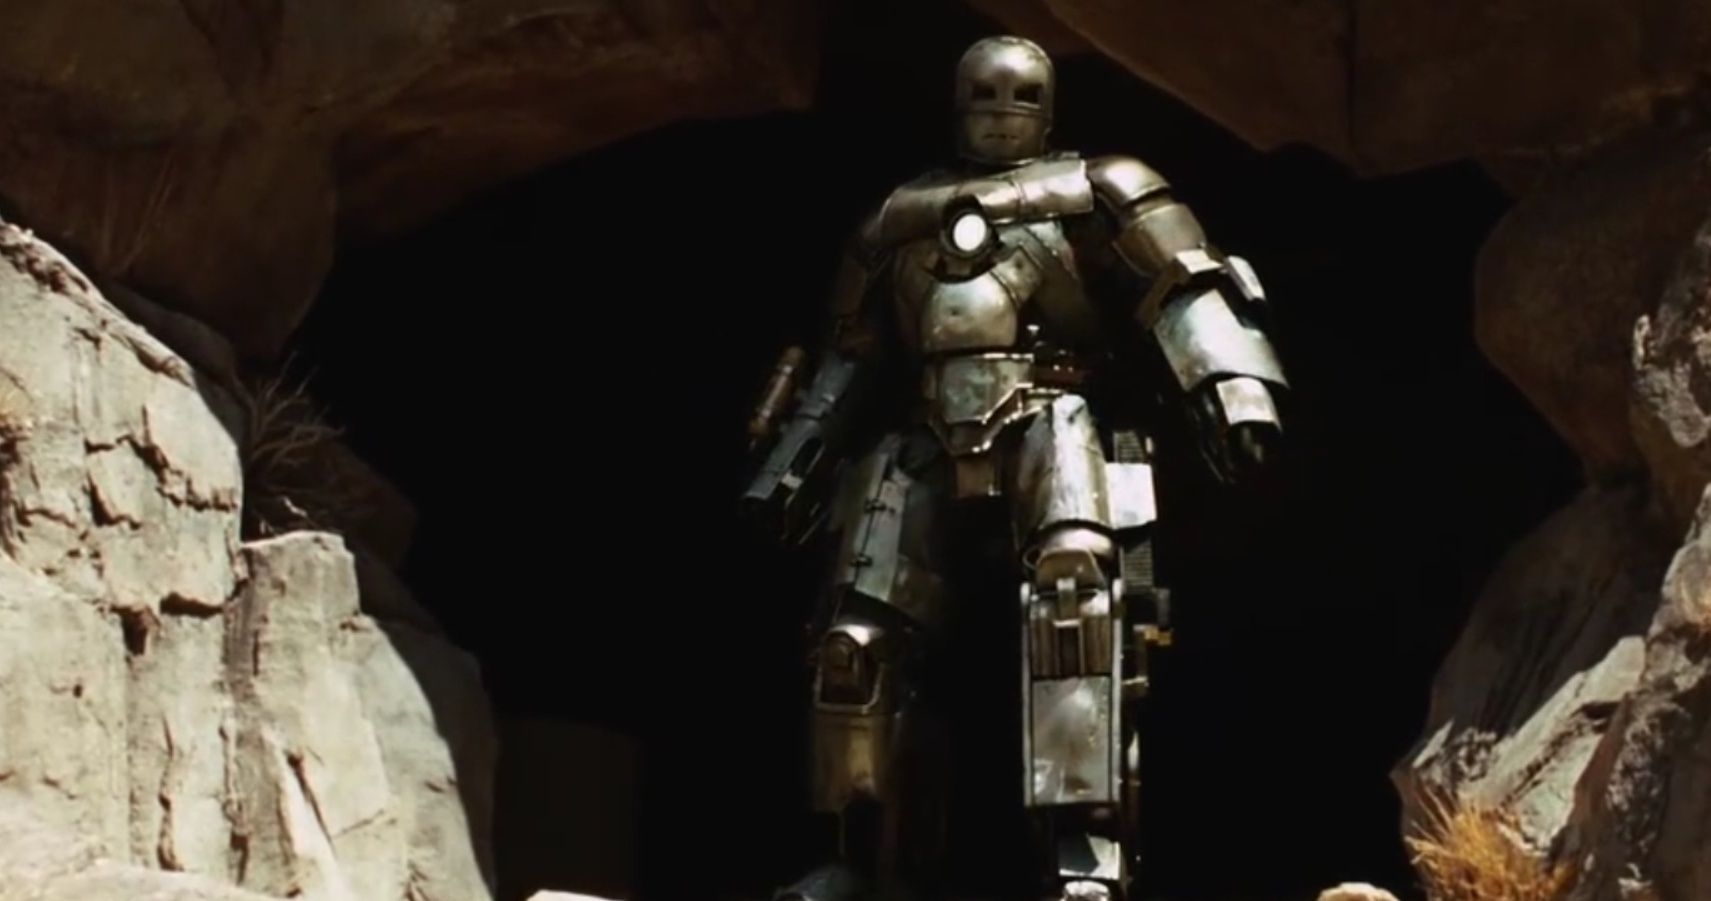 Iron man 20 Things Fans Never Knew About The Mark 20 Armor   CBR